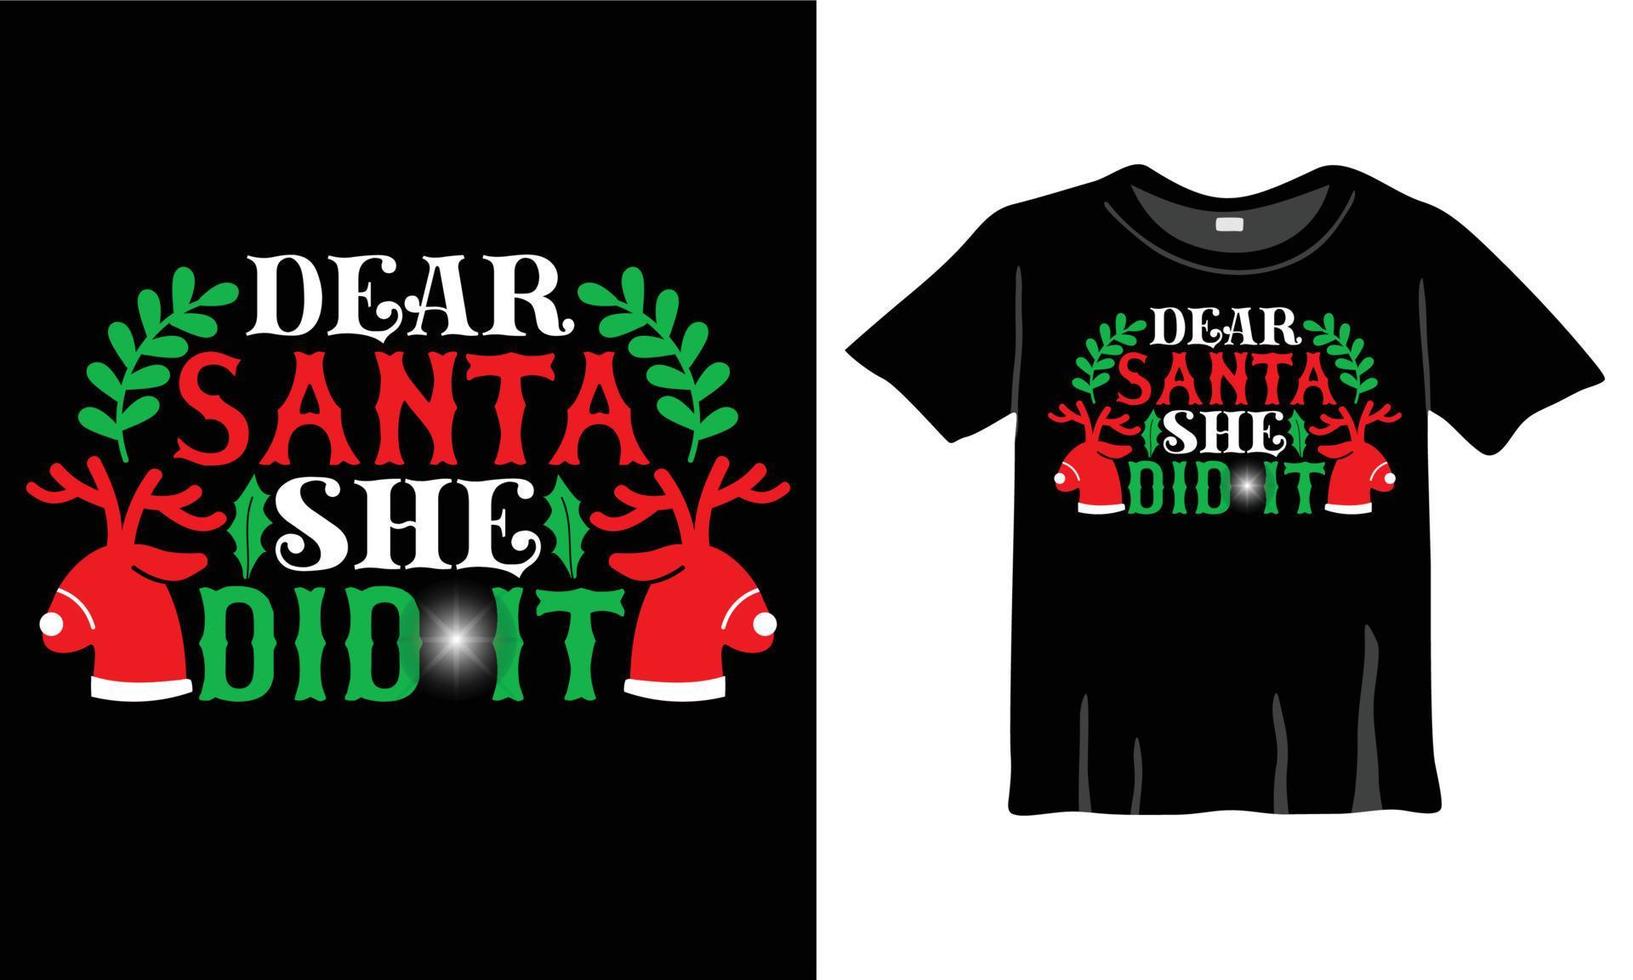 Dear santa she did it t-shirt design. Christmas T-Shirt Design for Christmas Celebration. Good for Greeting cards, t-shirts, mugs, and gifts. For Men, Women, and Baby clothing vector